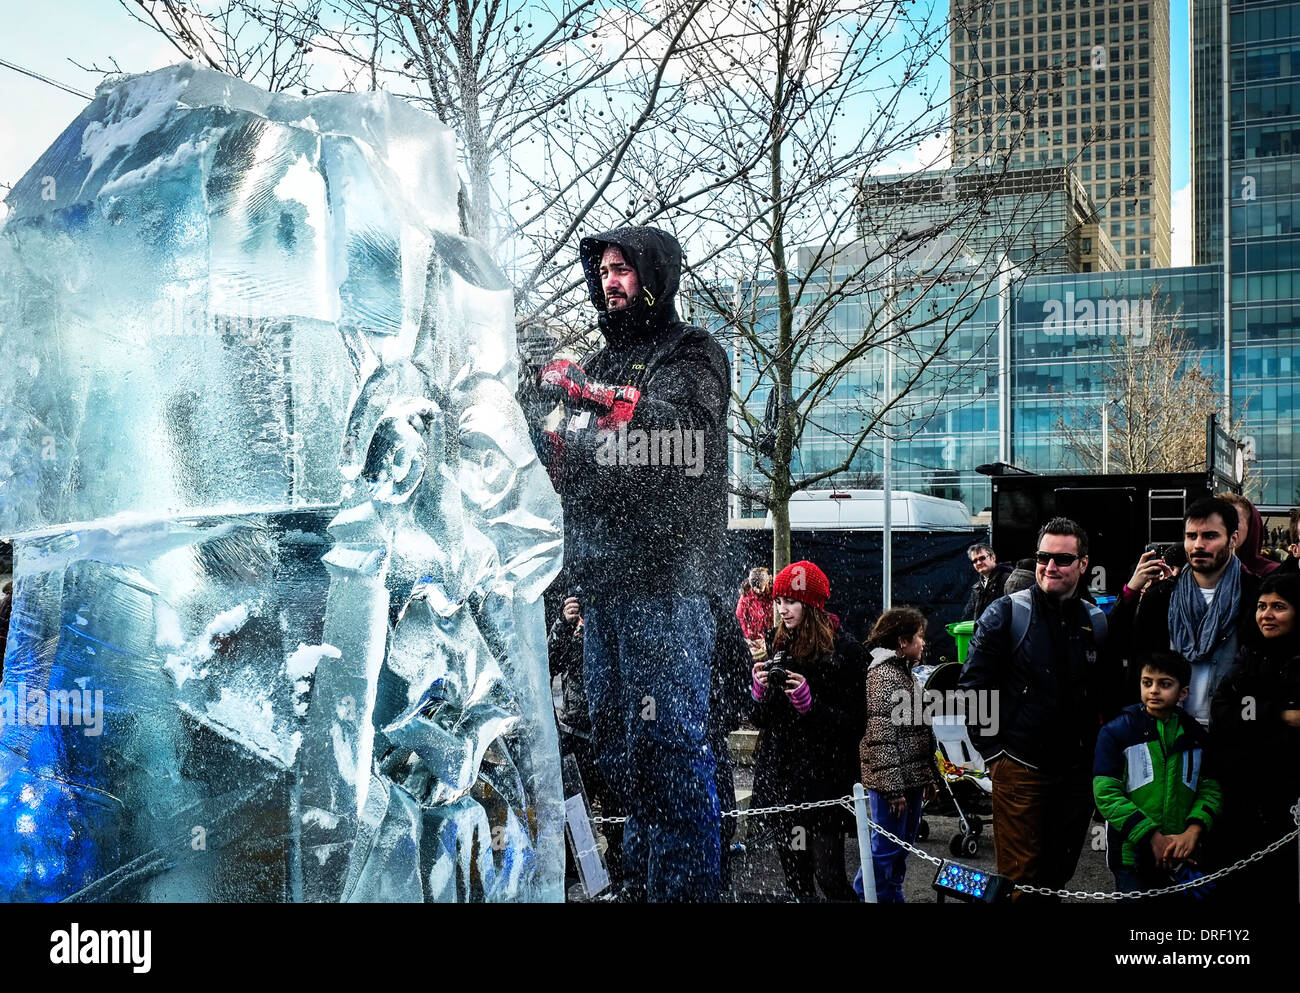 Bruno Fleurit from the the Spanish team working to create their ice sculpture as part of the London Ice Sculpting Festival. Stock Photo